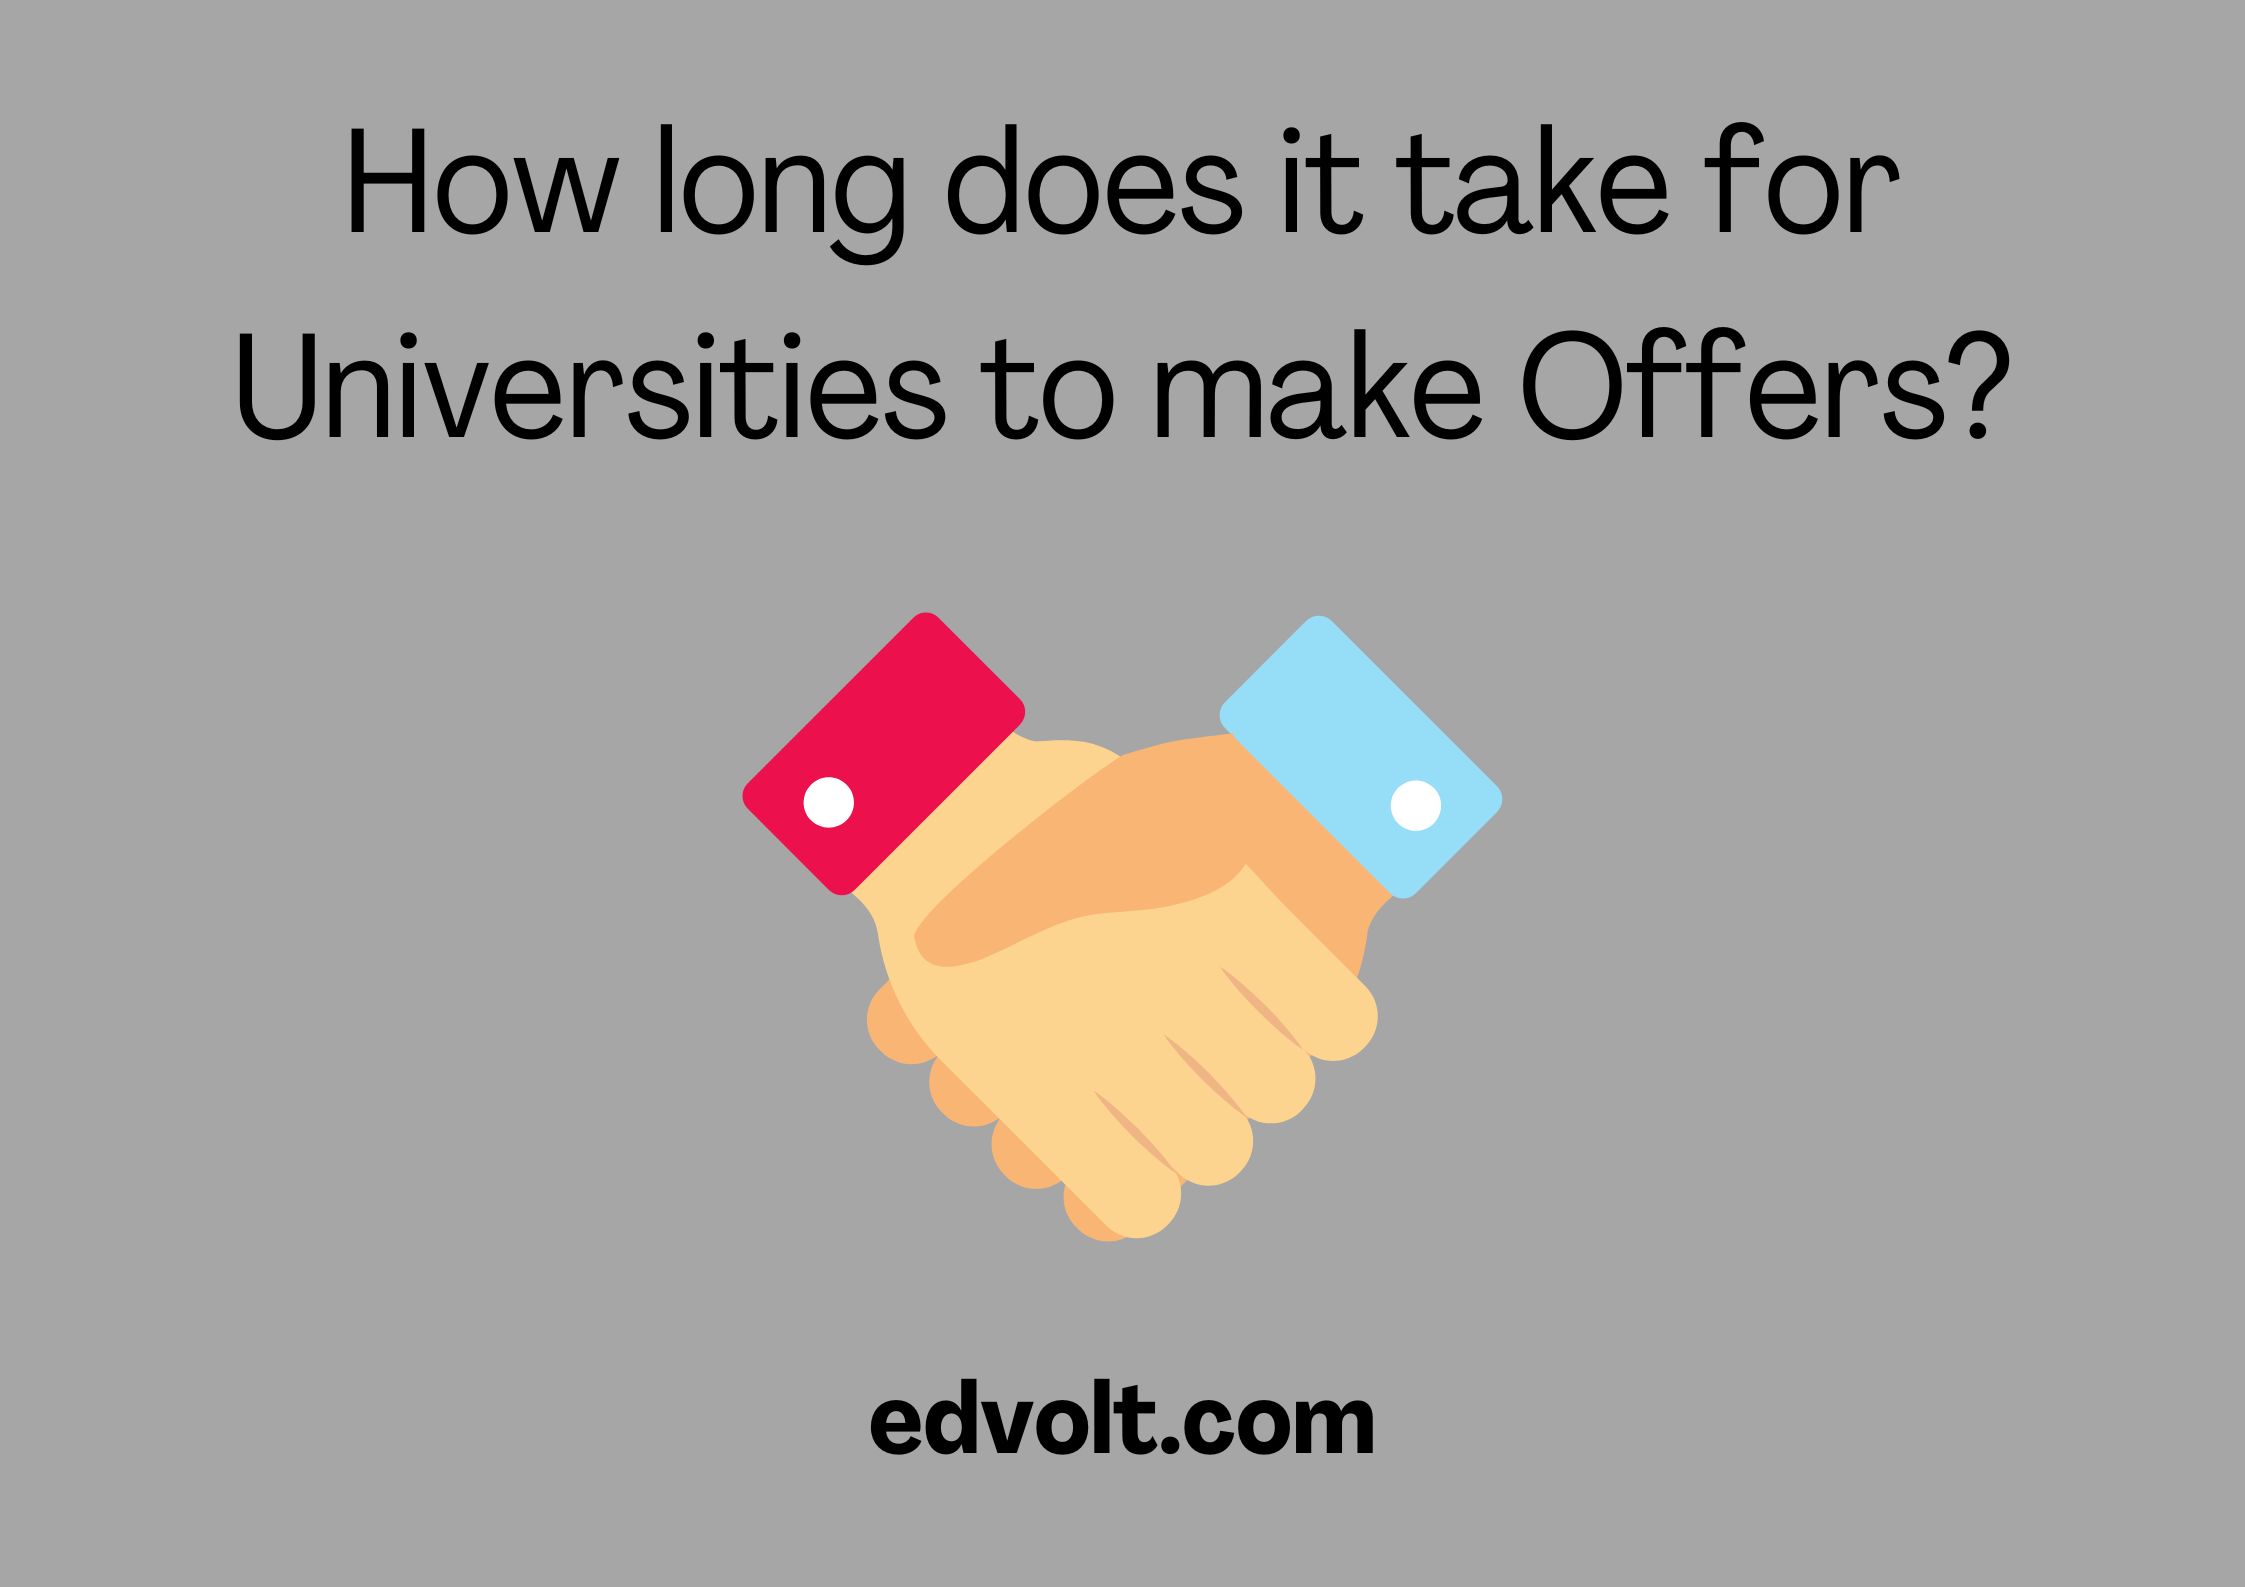 How long does it take for Universities to make Offers